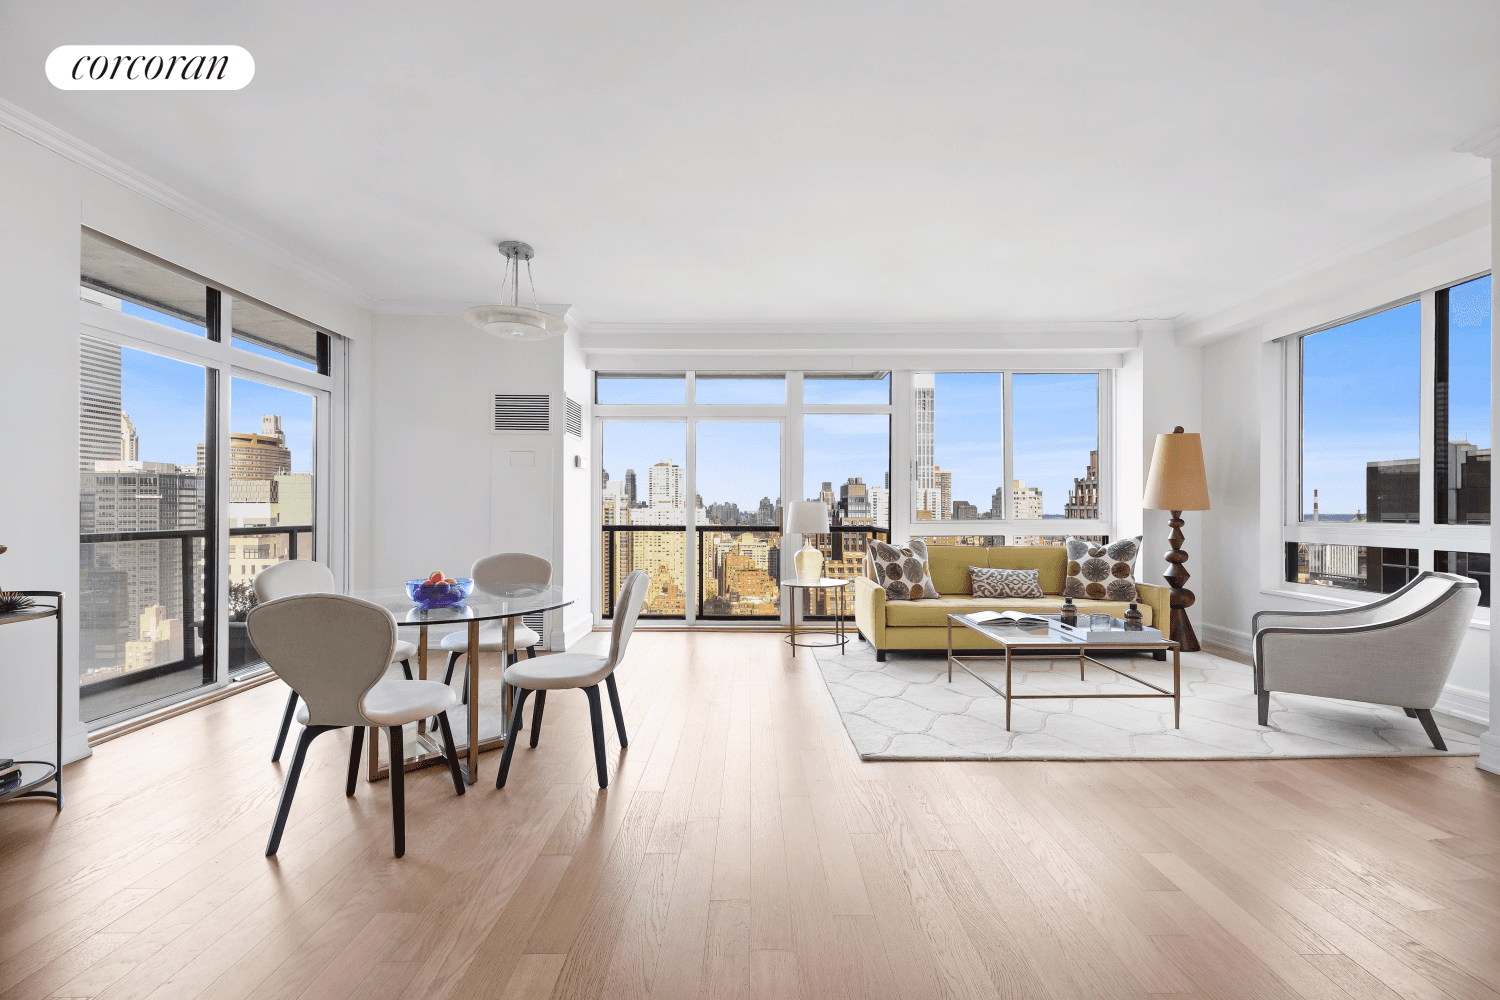 Sitting high on the 35th floor boasting spectacular open city views is this oversized 1 bedroom, 1.